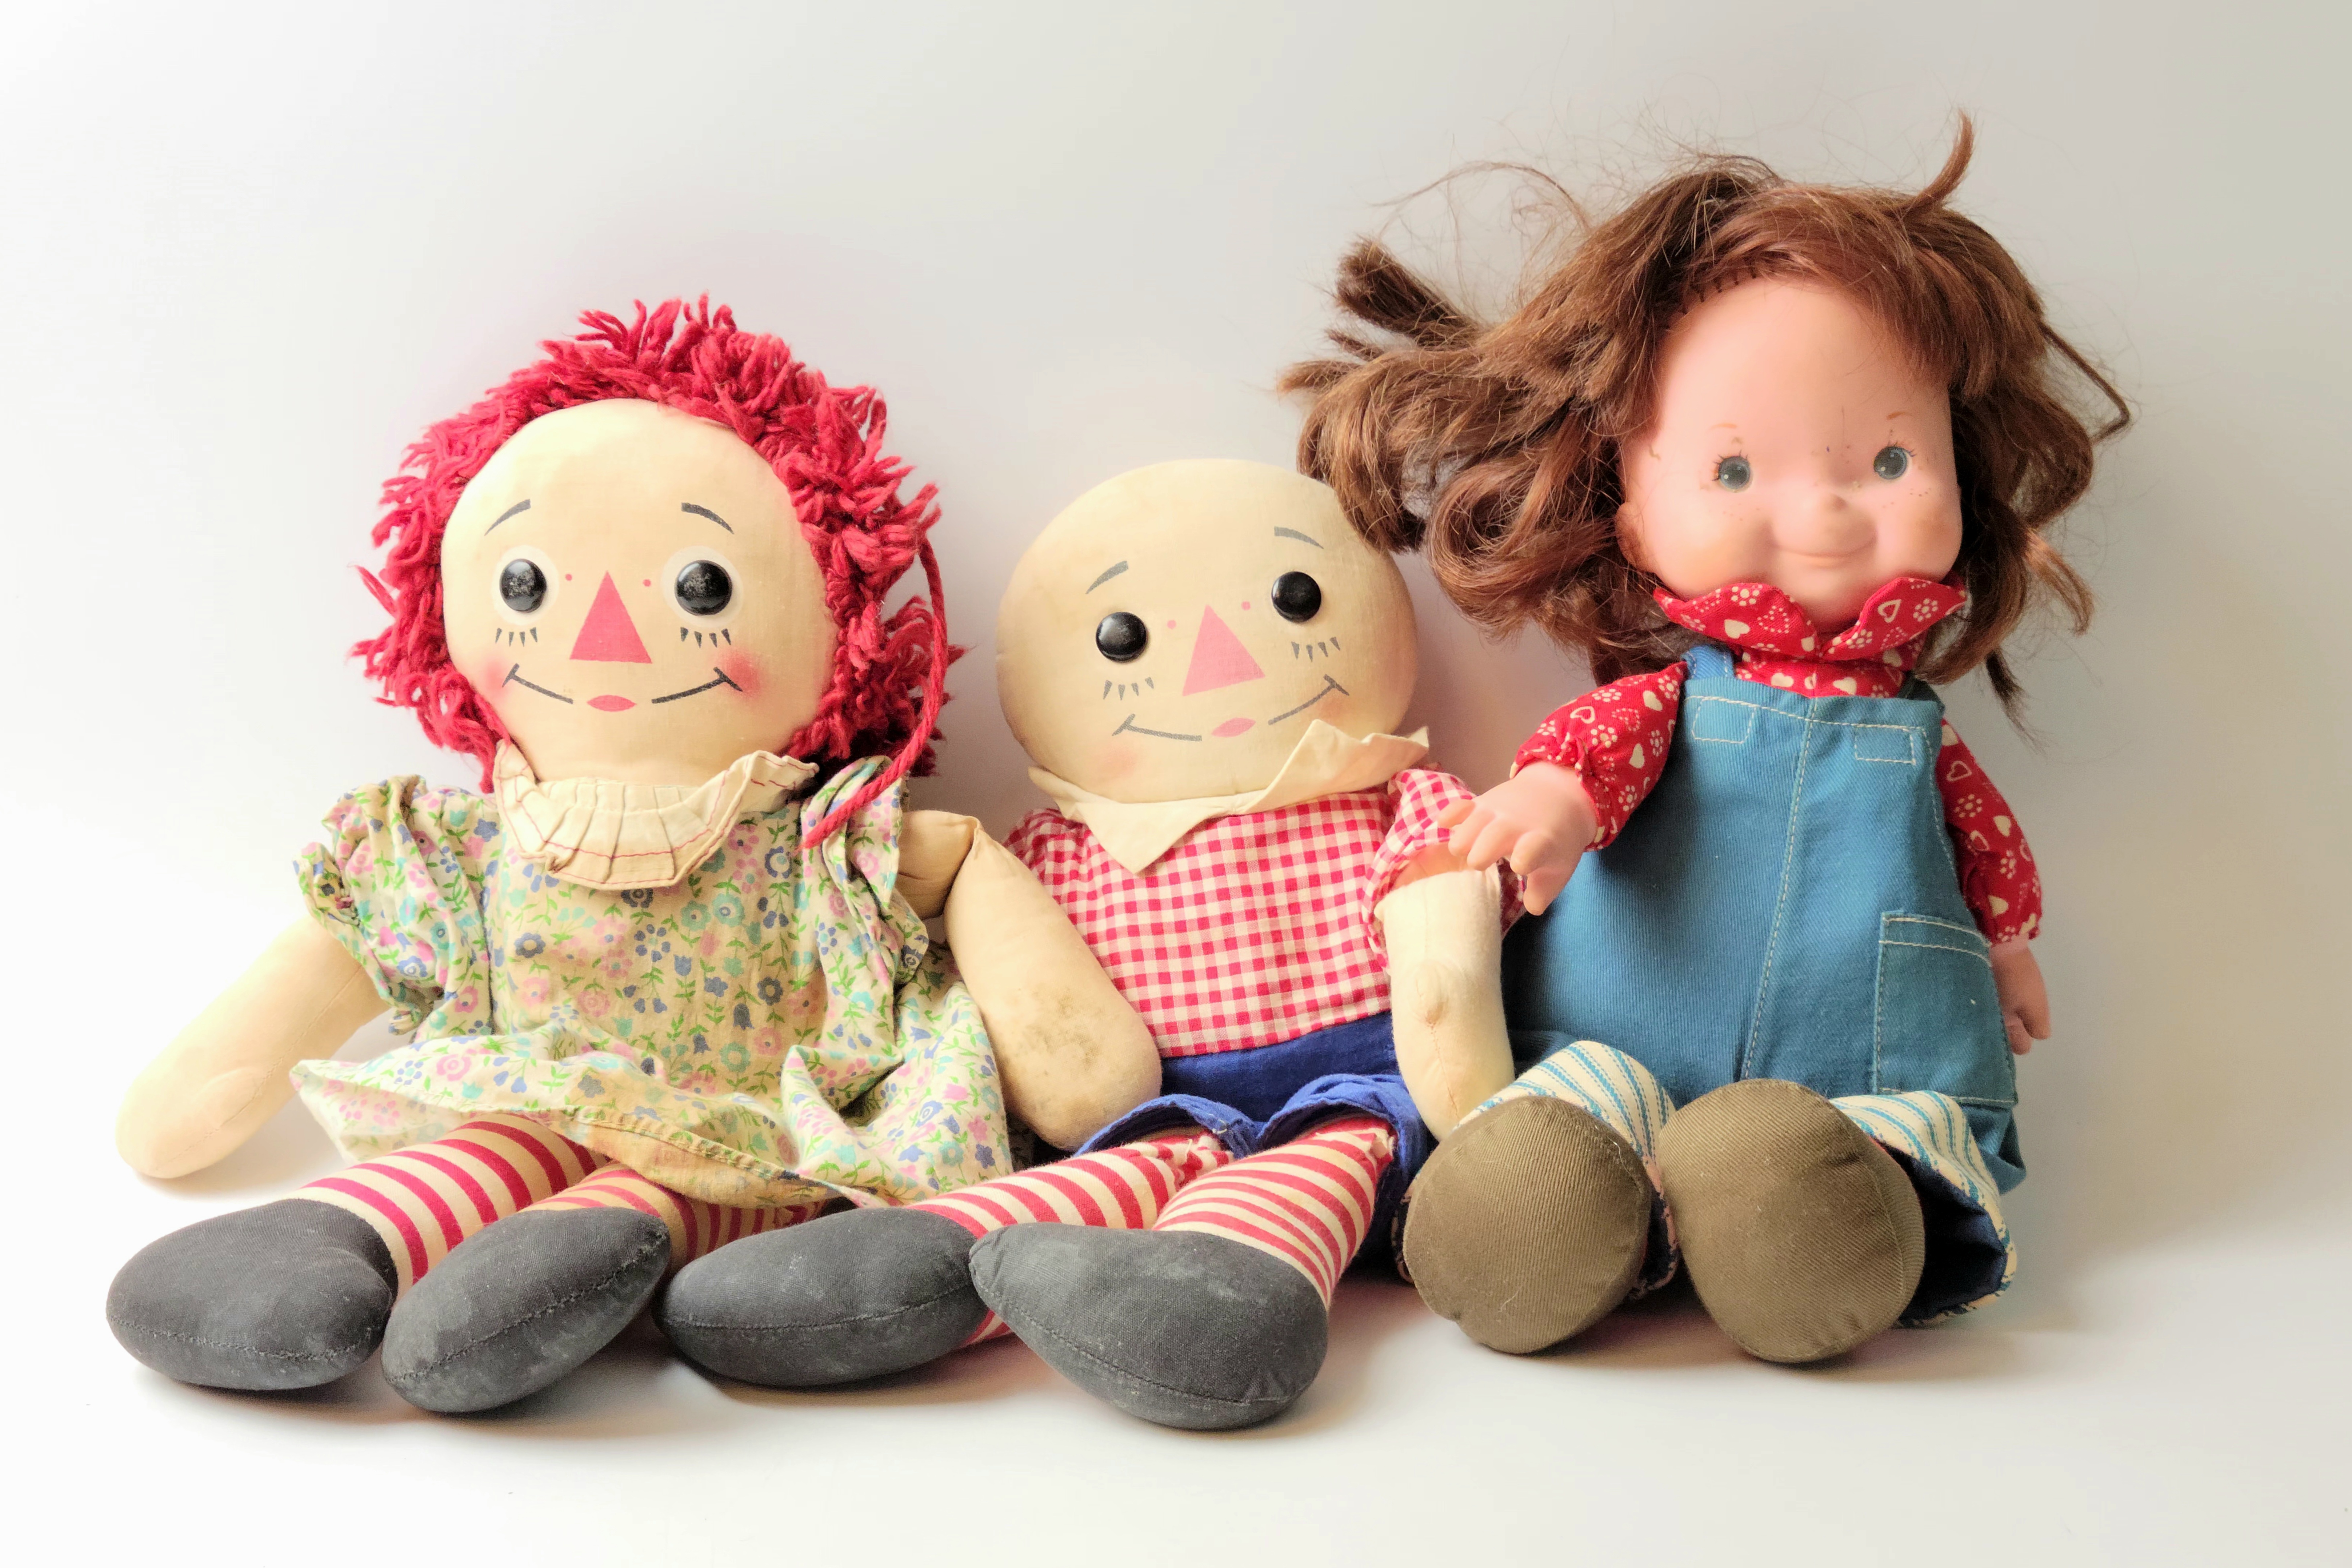 Vintage Raggedy Ann & Andy / My Friend Audrey Doll Grouping